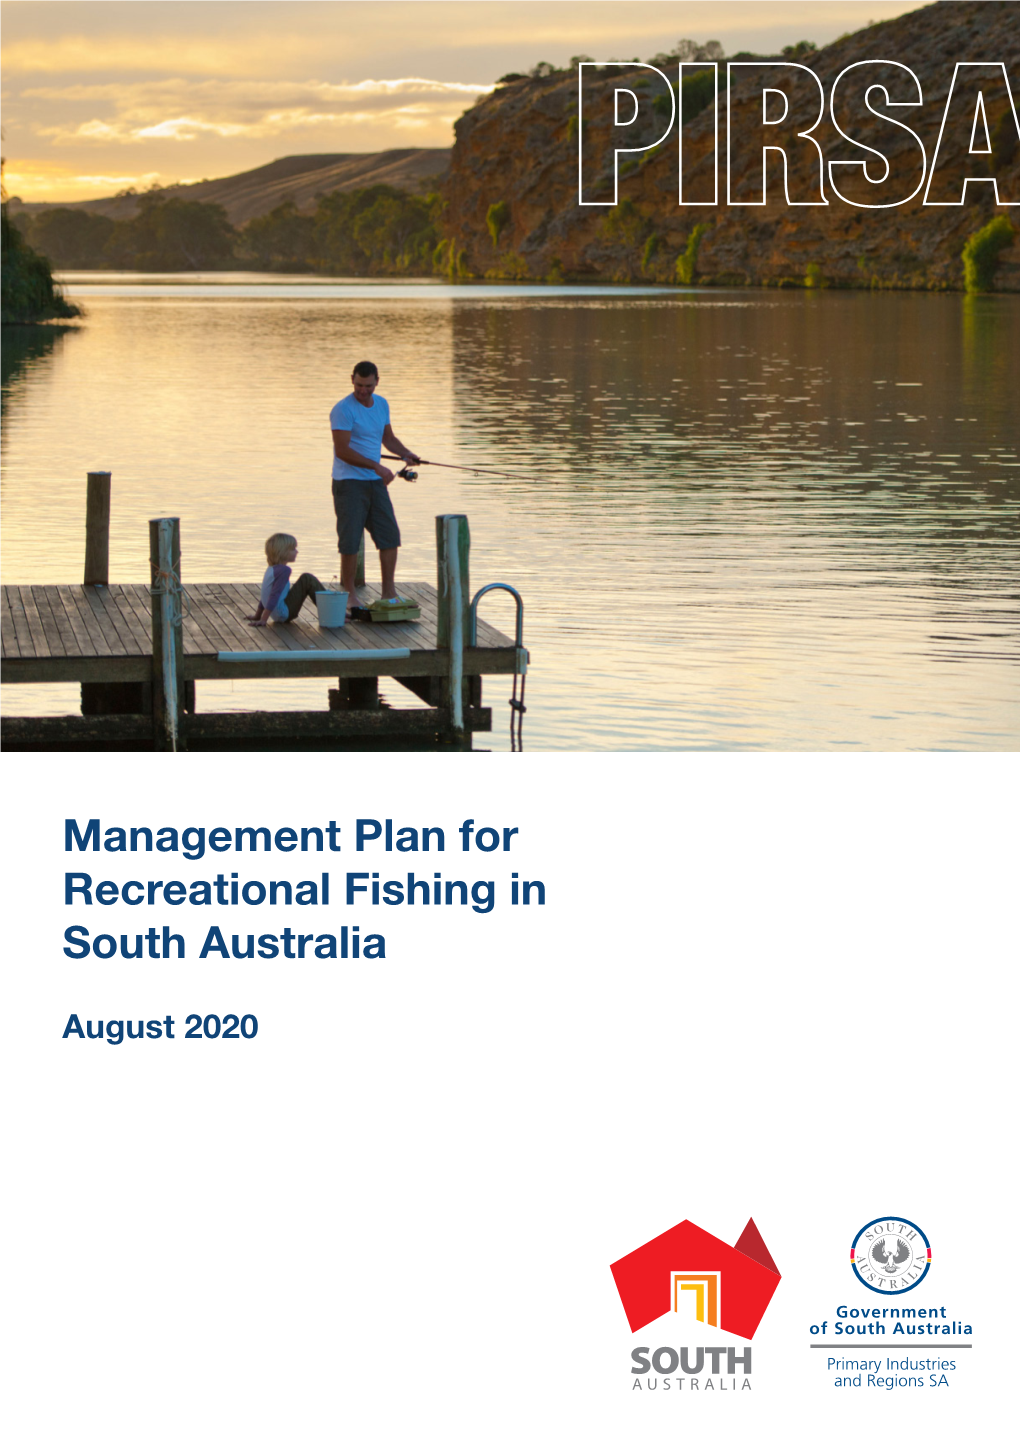 Management Plan for Recreational Fishing in South Australia